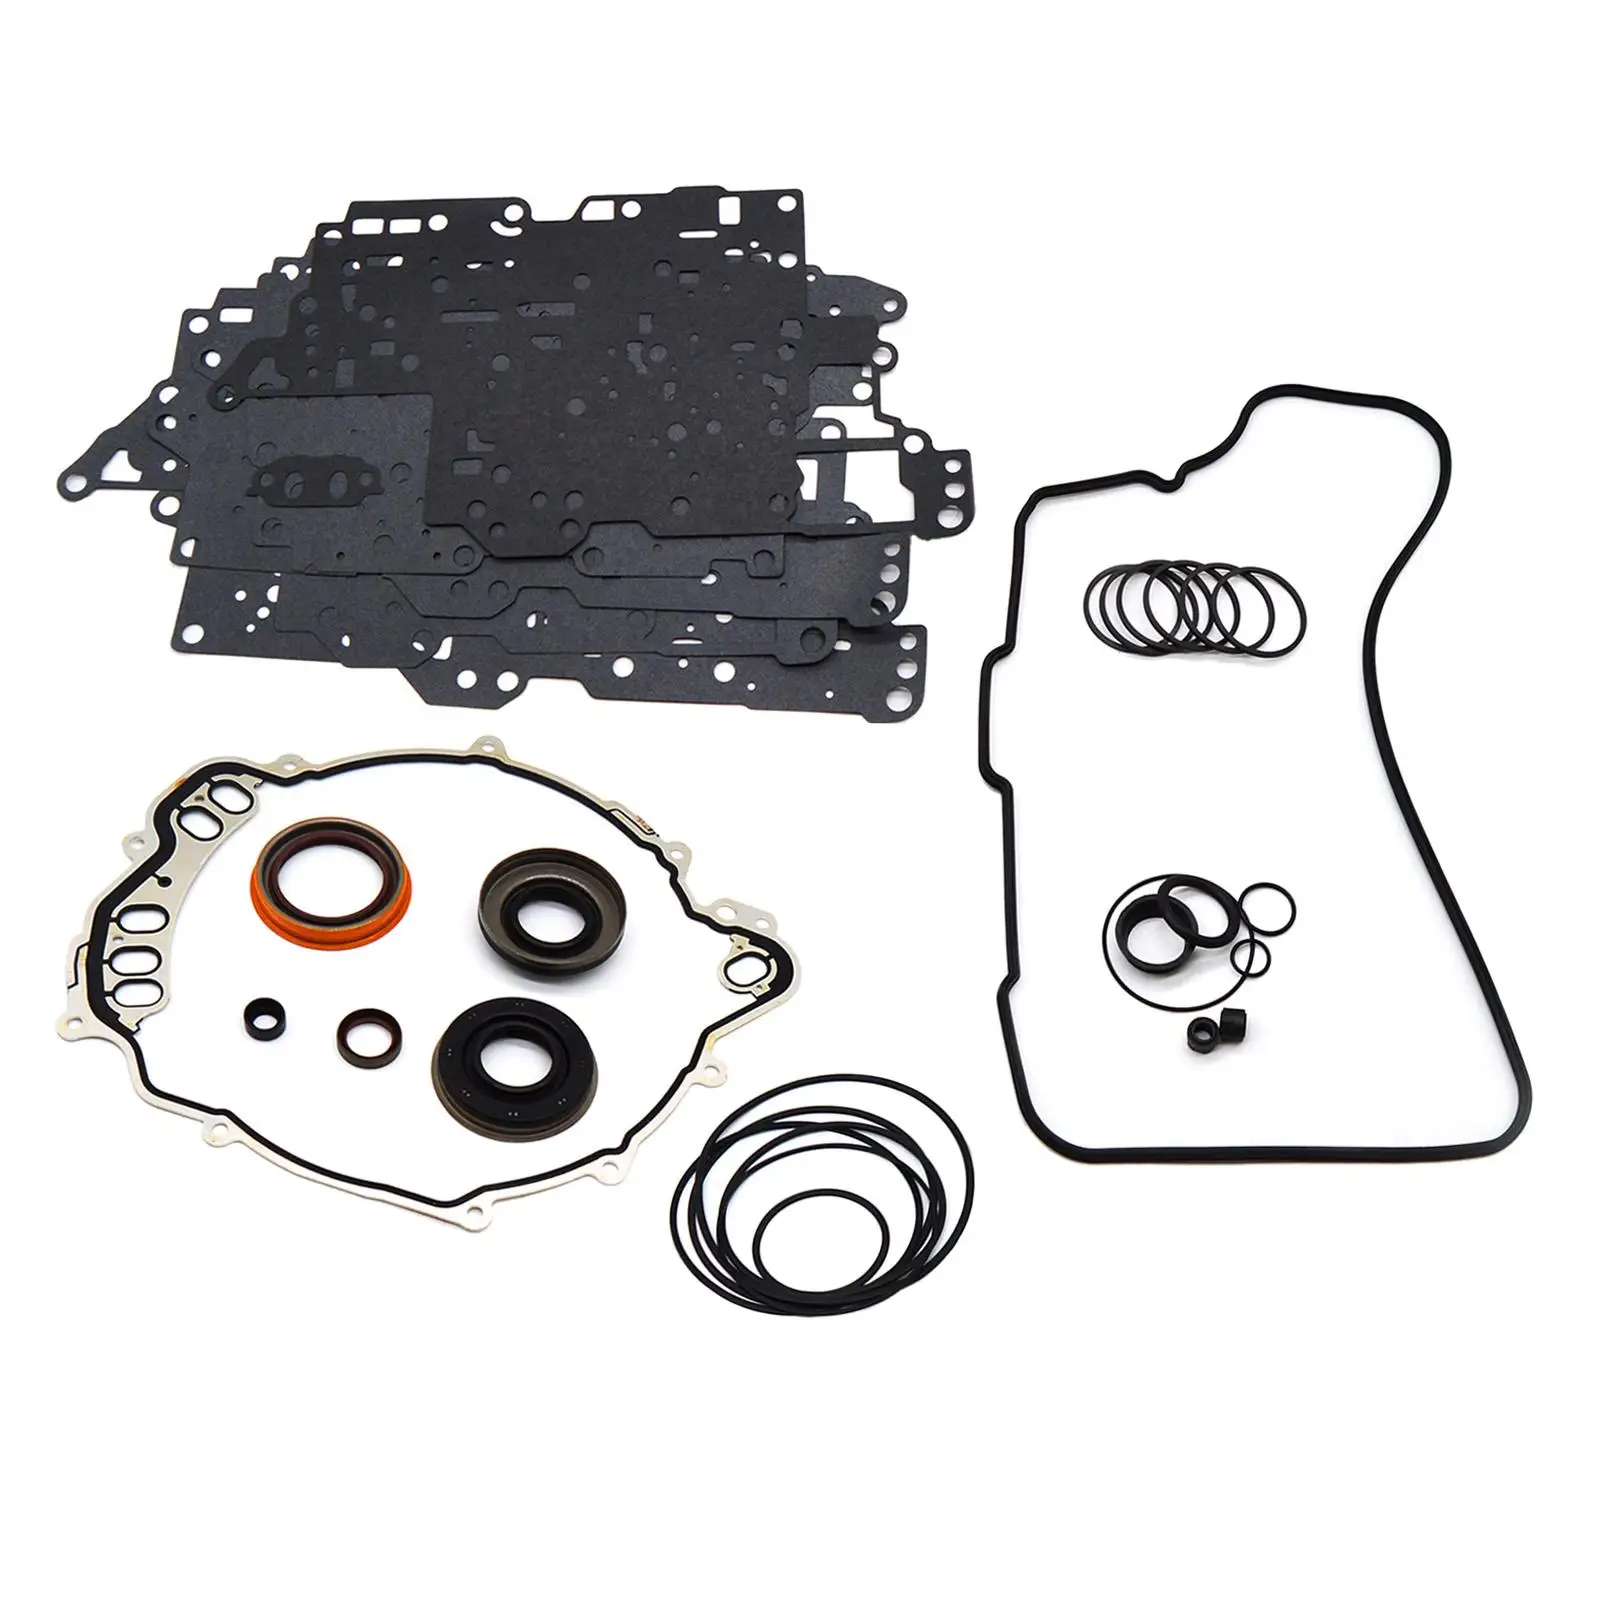 6T70 6T75 Auto Transmission Master Rebuild Kit Rubber Repair Kit Assembly Fits for Cadillac T19600A Accessories Car Supplies